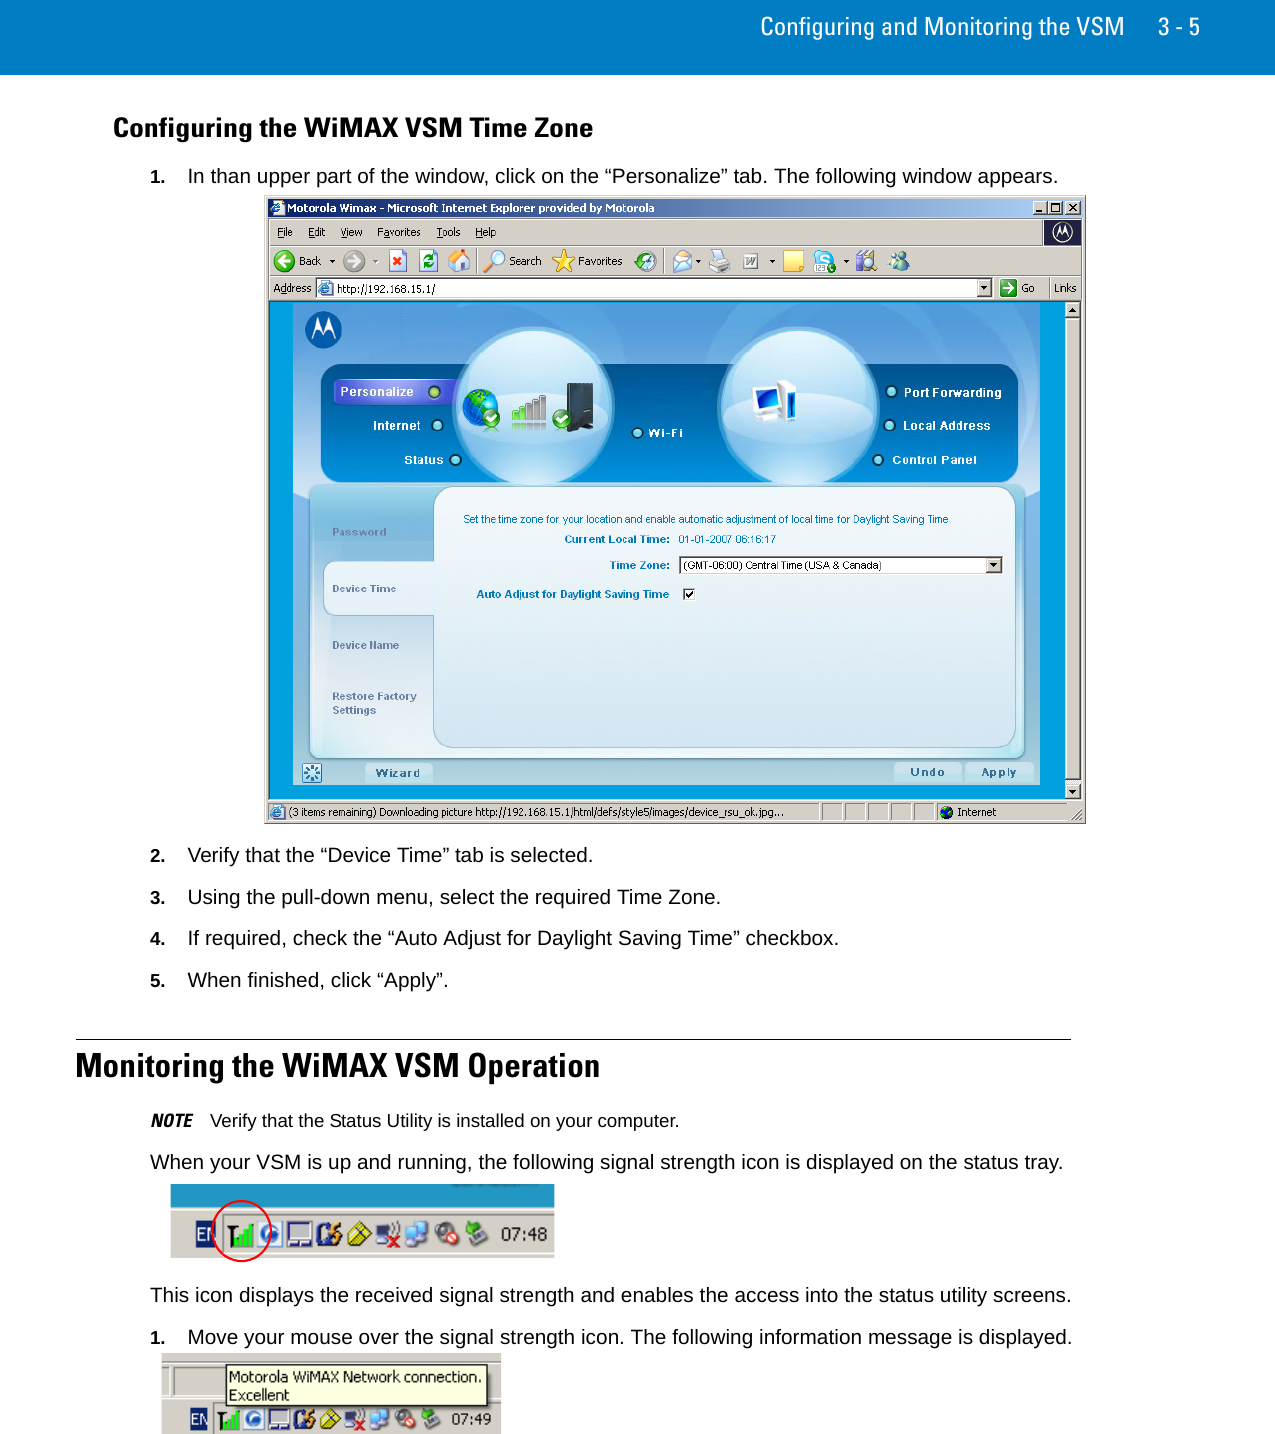 Configuring and Monitoring the VSM 3 - 5Configuring the WiMAX VSM Time Zone1. In than upper part of the window, click on the “Personalize” tab. The following window appears.2. Verify that the “Device Time” tab is selected.3. Using the pull-down menu, select the required Time Zone.4. If required, check the “Auto Adjust for Daylight Saving Time” checkbox.5. When finished, click “Apply”.Monitoring the WiMAX VSM OperationNOTE Verify that the Status Utility is installed on your computer.When your VSM is up and running, the following signal strength icon is displayed on the status tray.This icon displays the received signal strength and enables the access into the status utility screens.1. Move your mouse over the signal strength icon. The following information message is displayed.